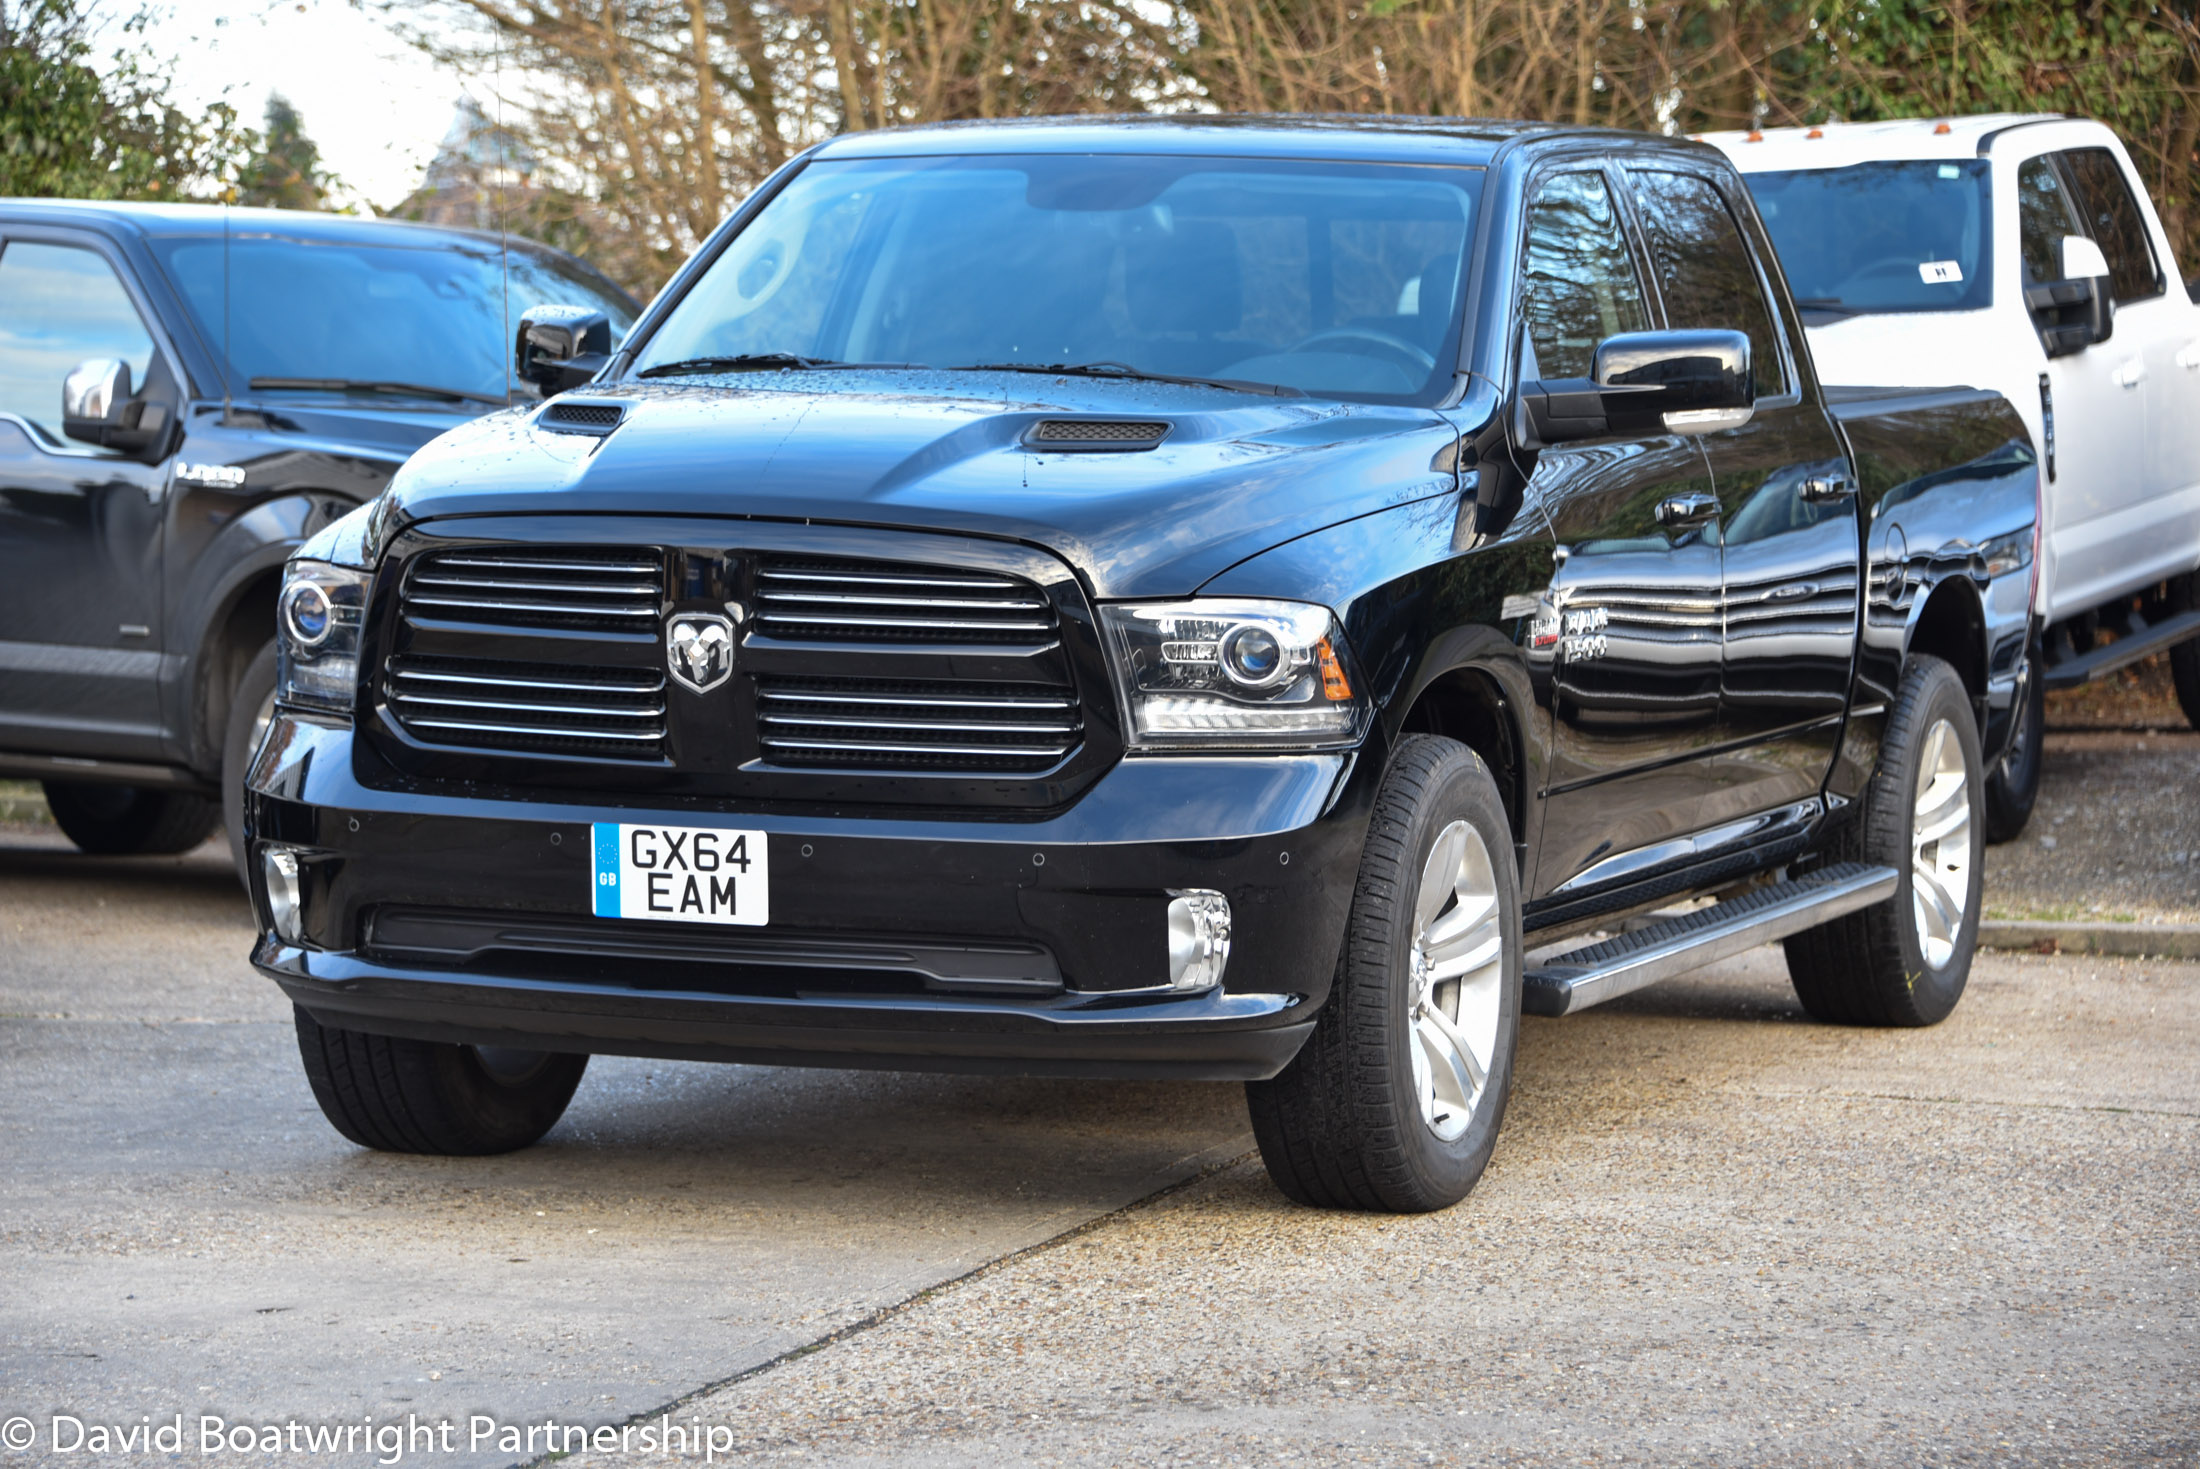 Dodge RAM with Prins LPG for sale UK